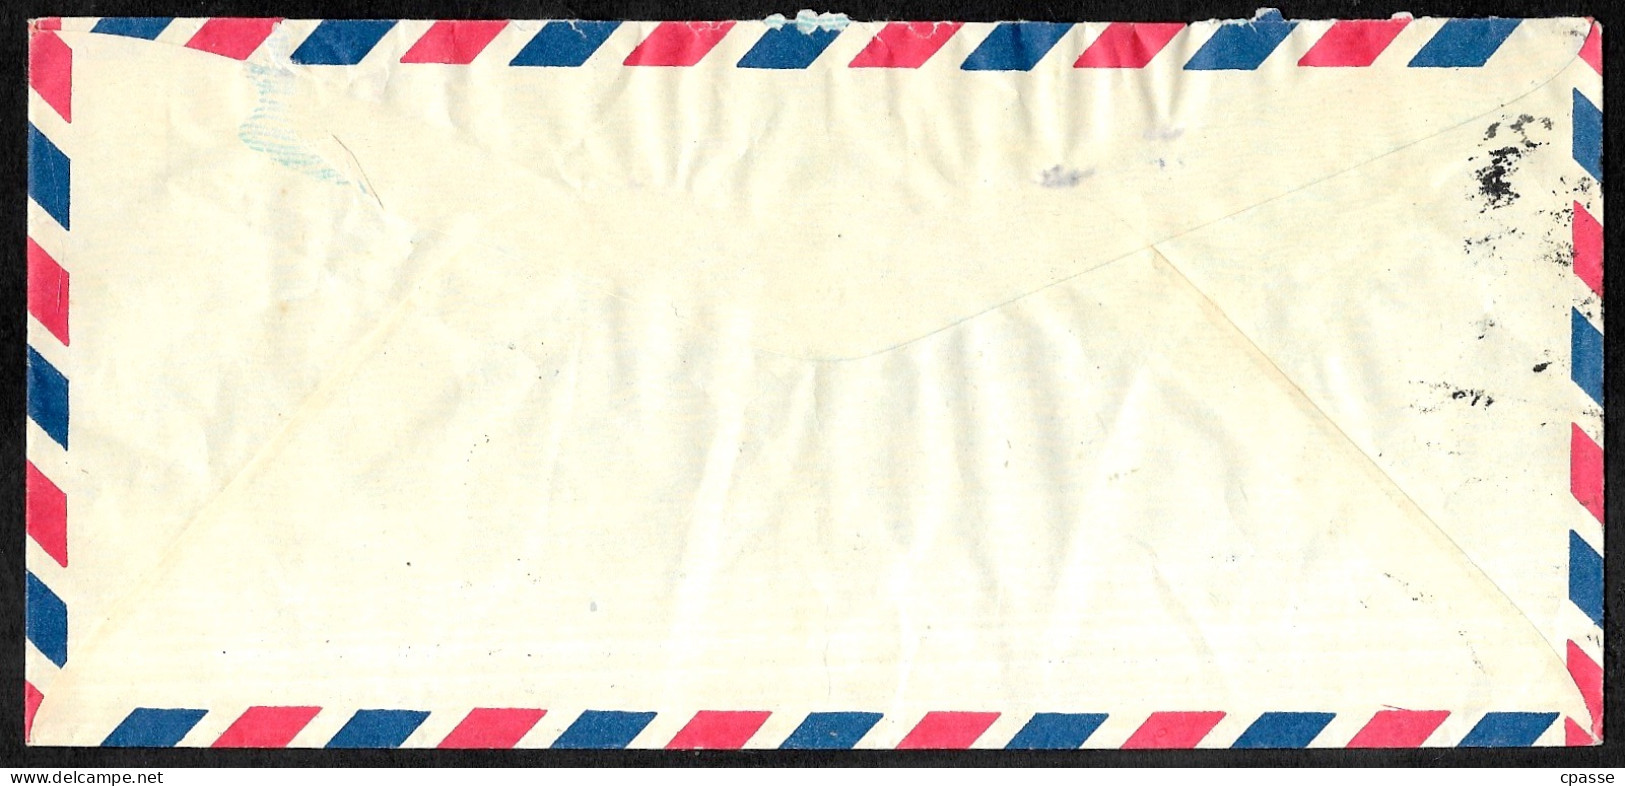 1979 Lettre (5 Stamps) Republic Of CHINA TAIWAN (Formose) Taipei To France POSTE AERIENNE By Air Mail - Luftpost